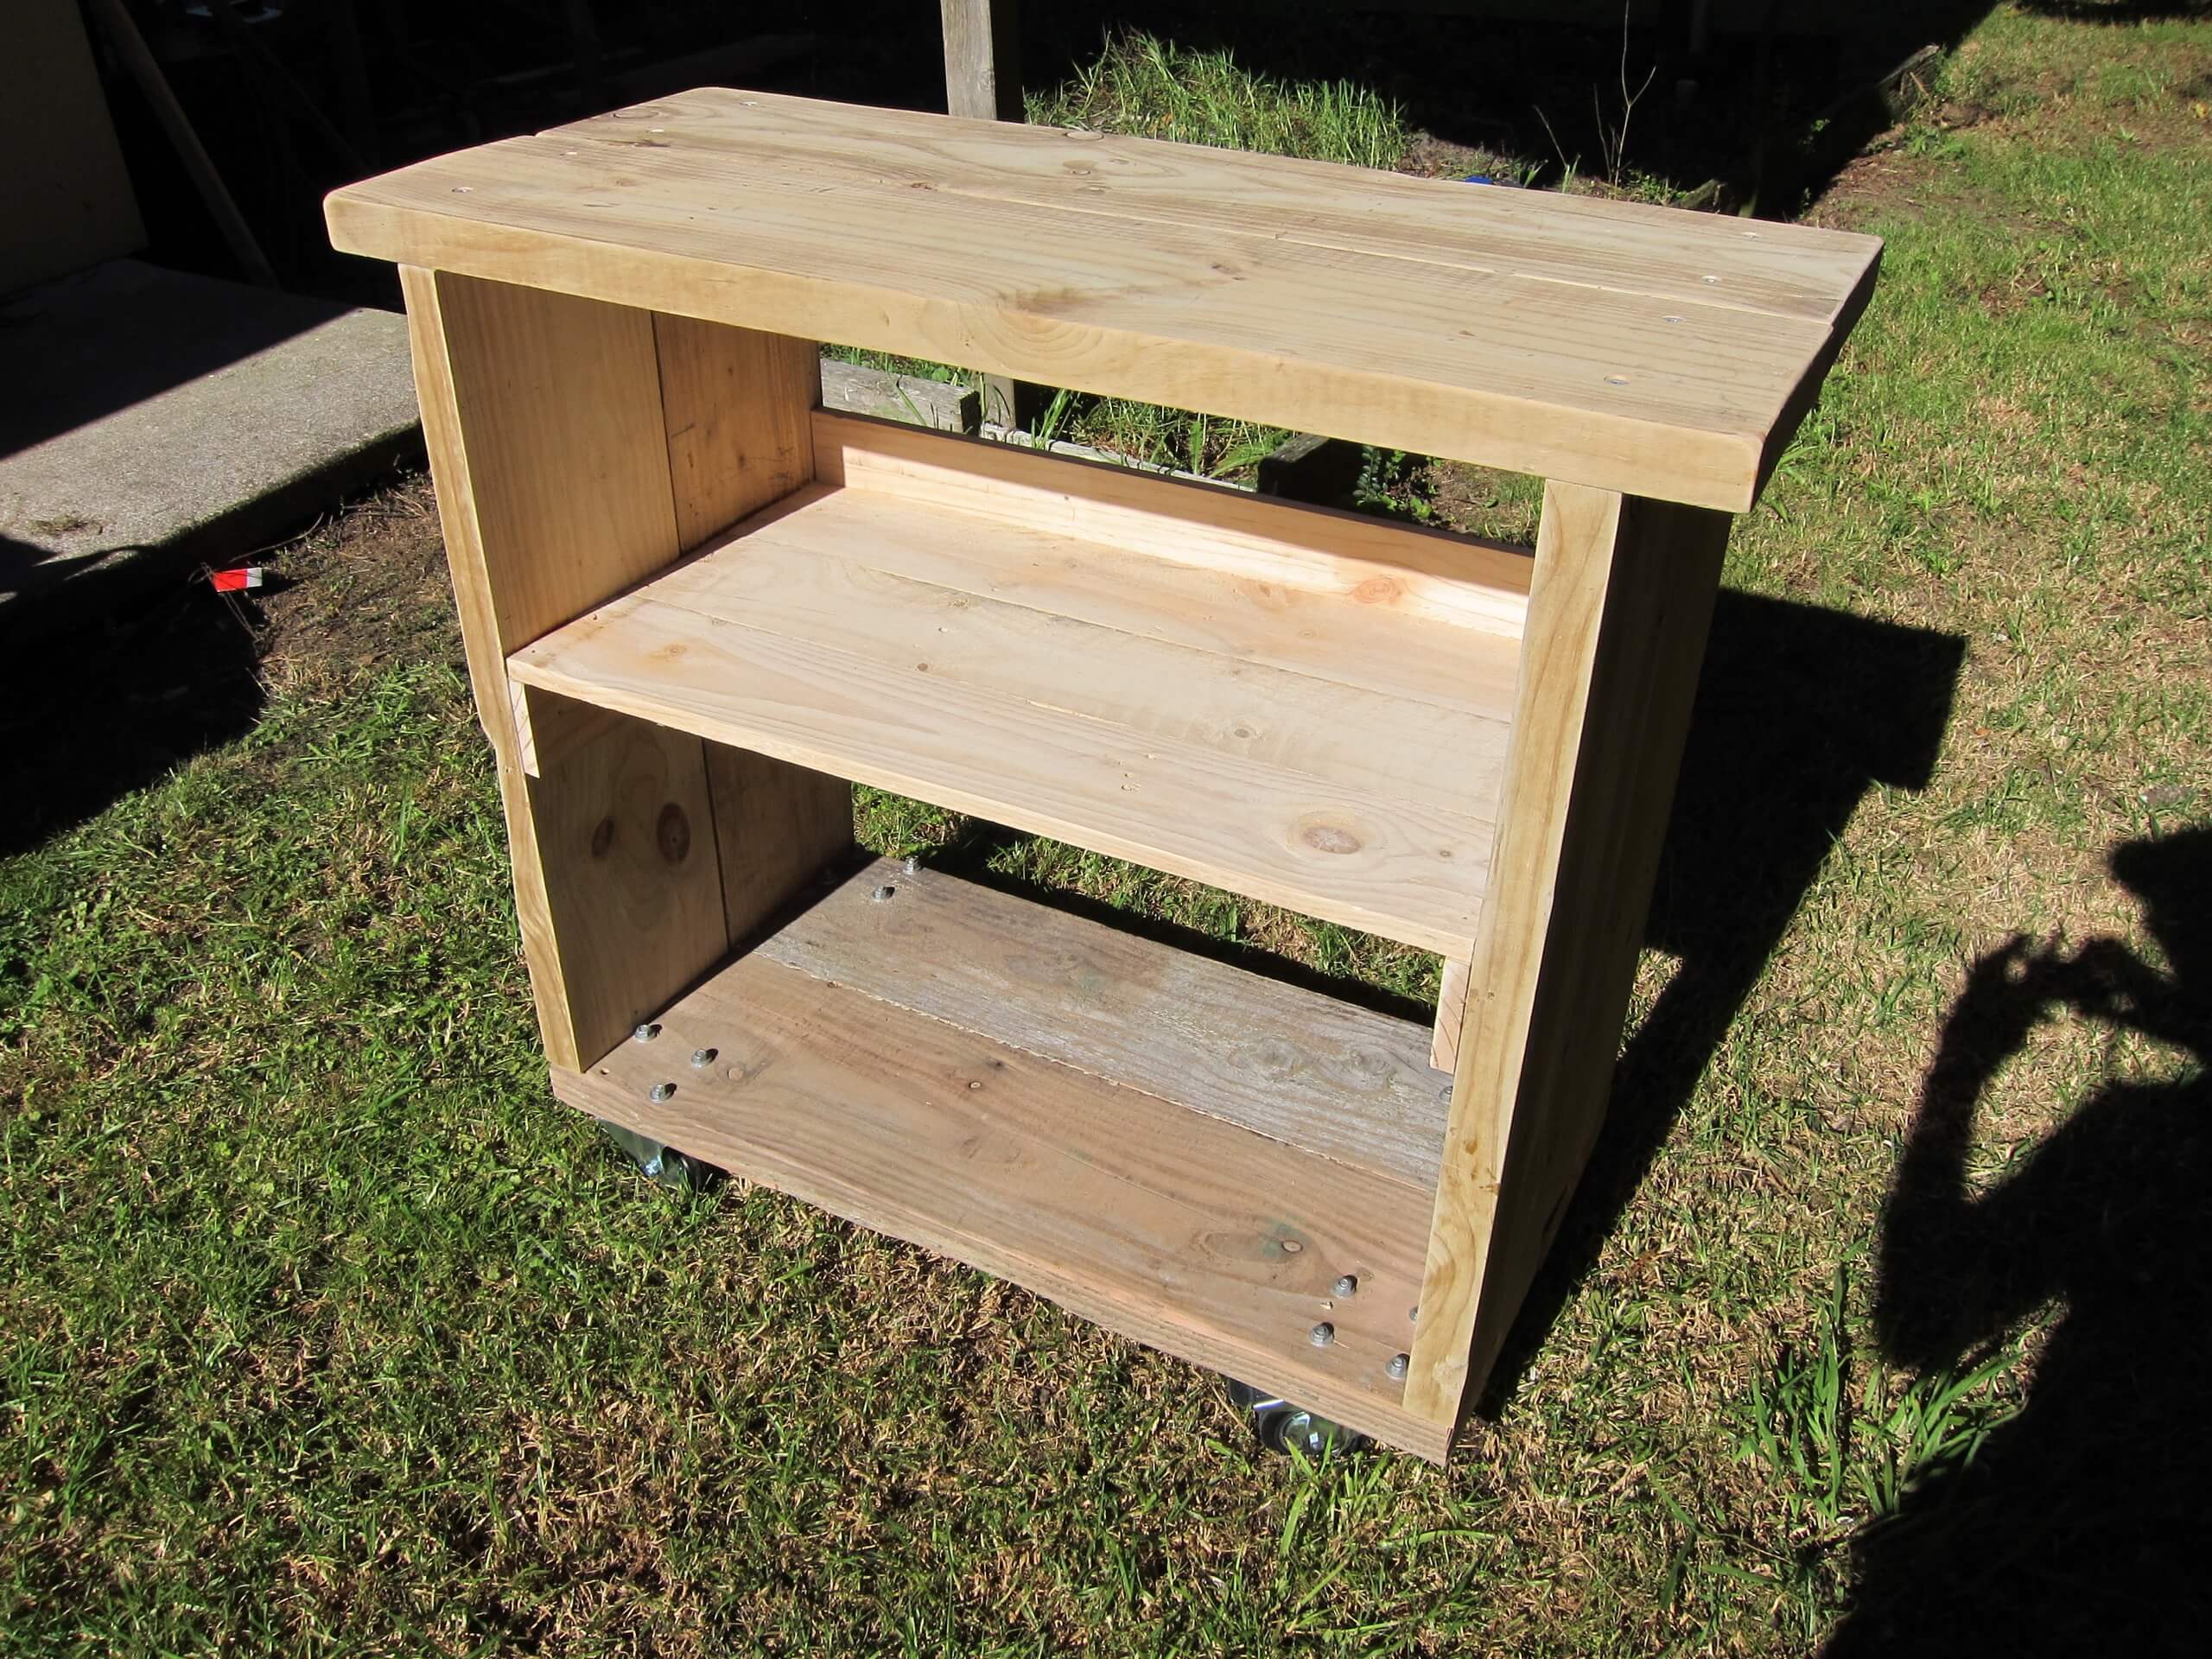 Image #32 Completed Workbench